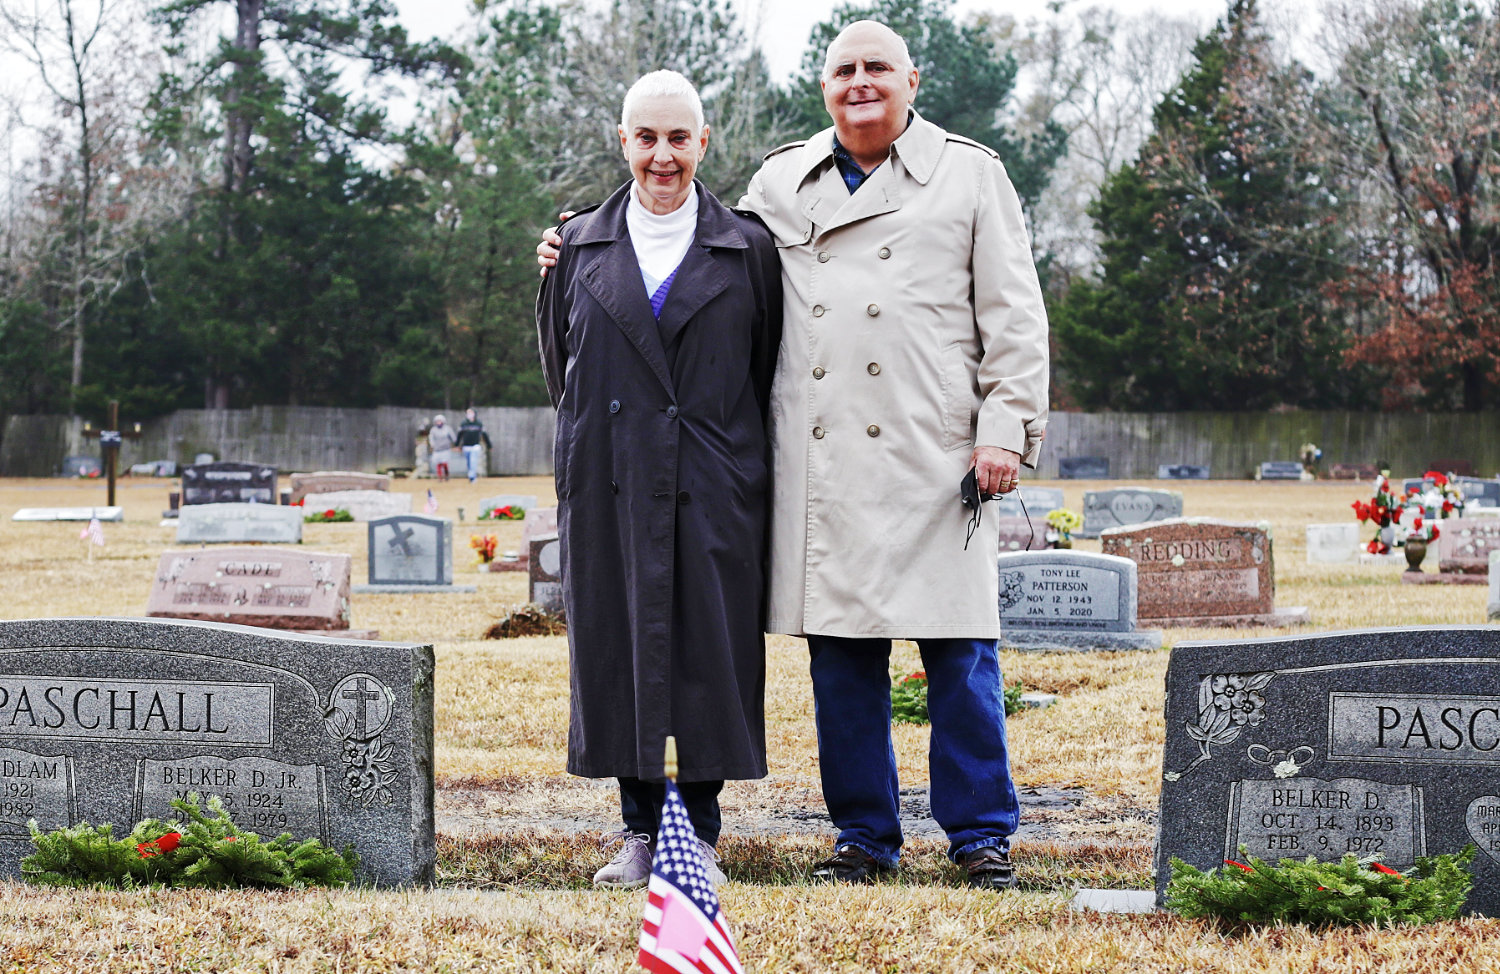 Phillip and Laura Paschall Brown placed wreaths at the headstones of Laura’s father and grandfather, Belker D. Paschall, Jr. and Belker D. Paschall, Sr., last Saturday.